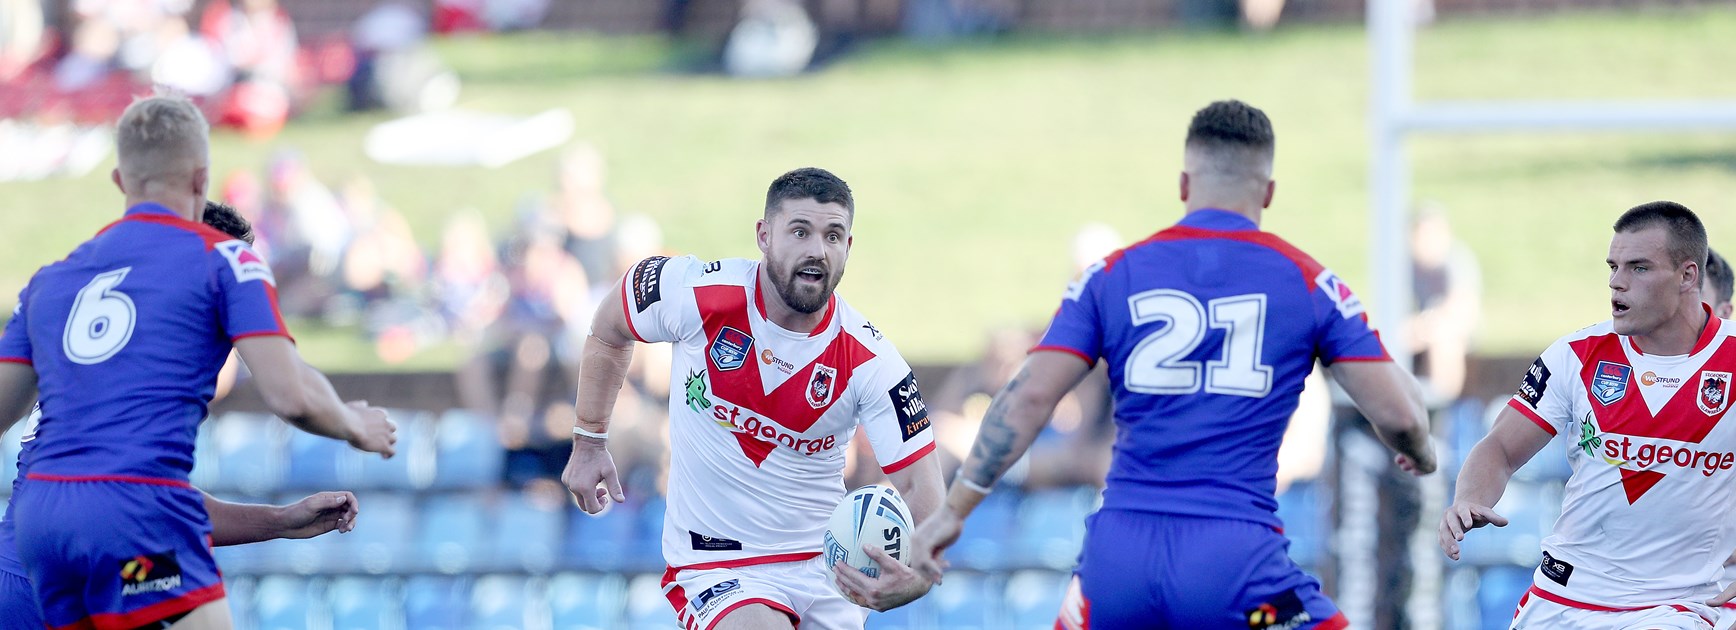 Canterbury Cup team: Round 10 v Knights